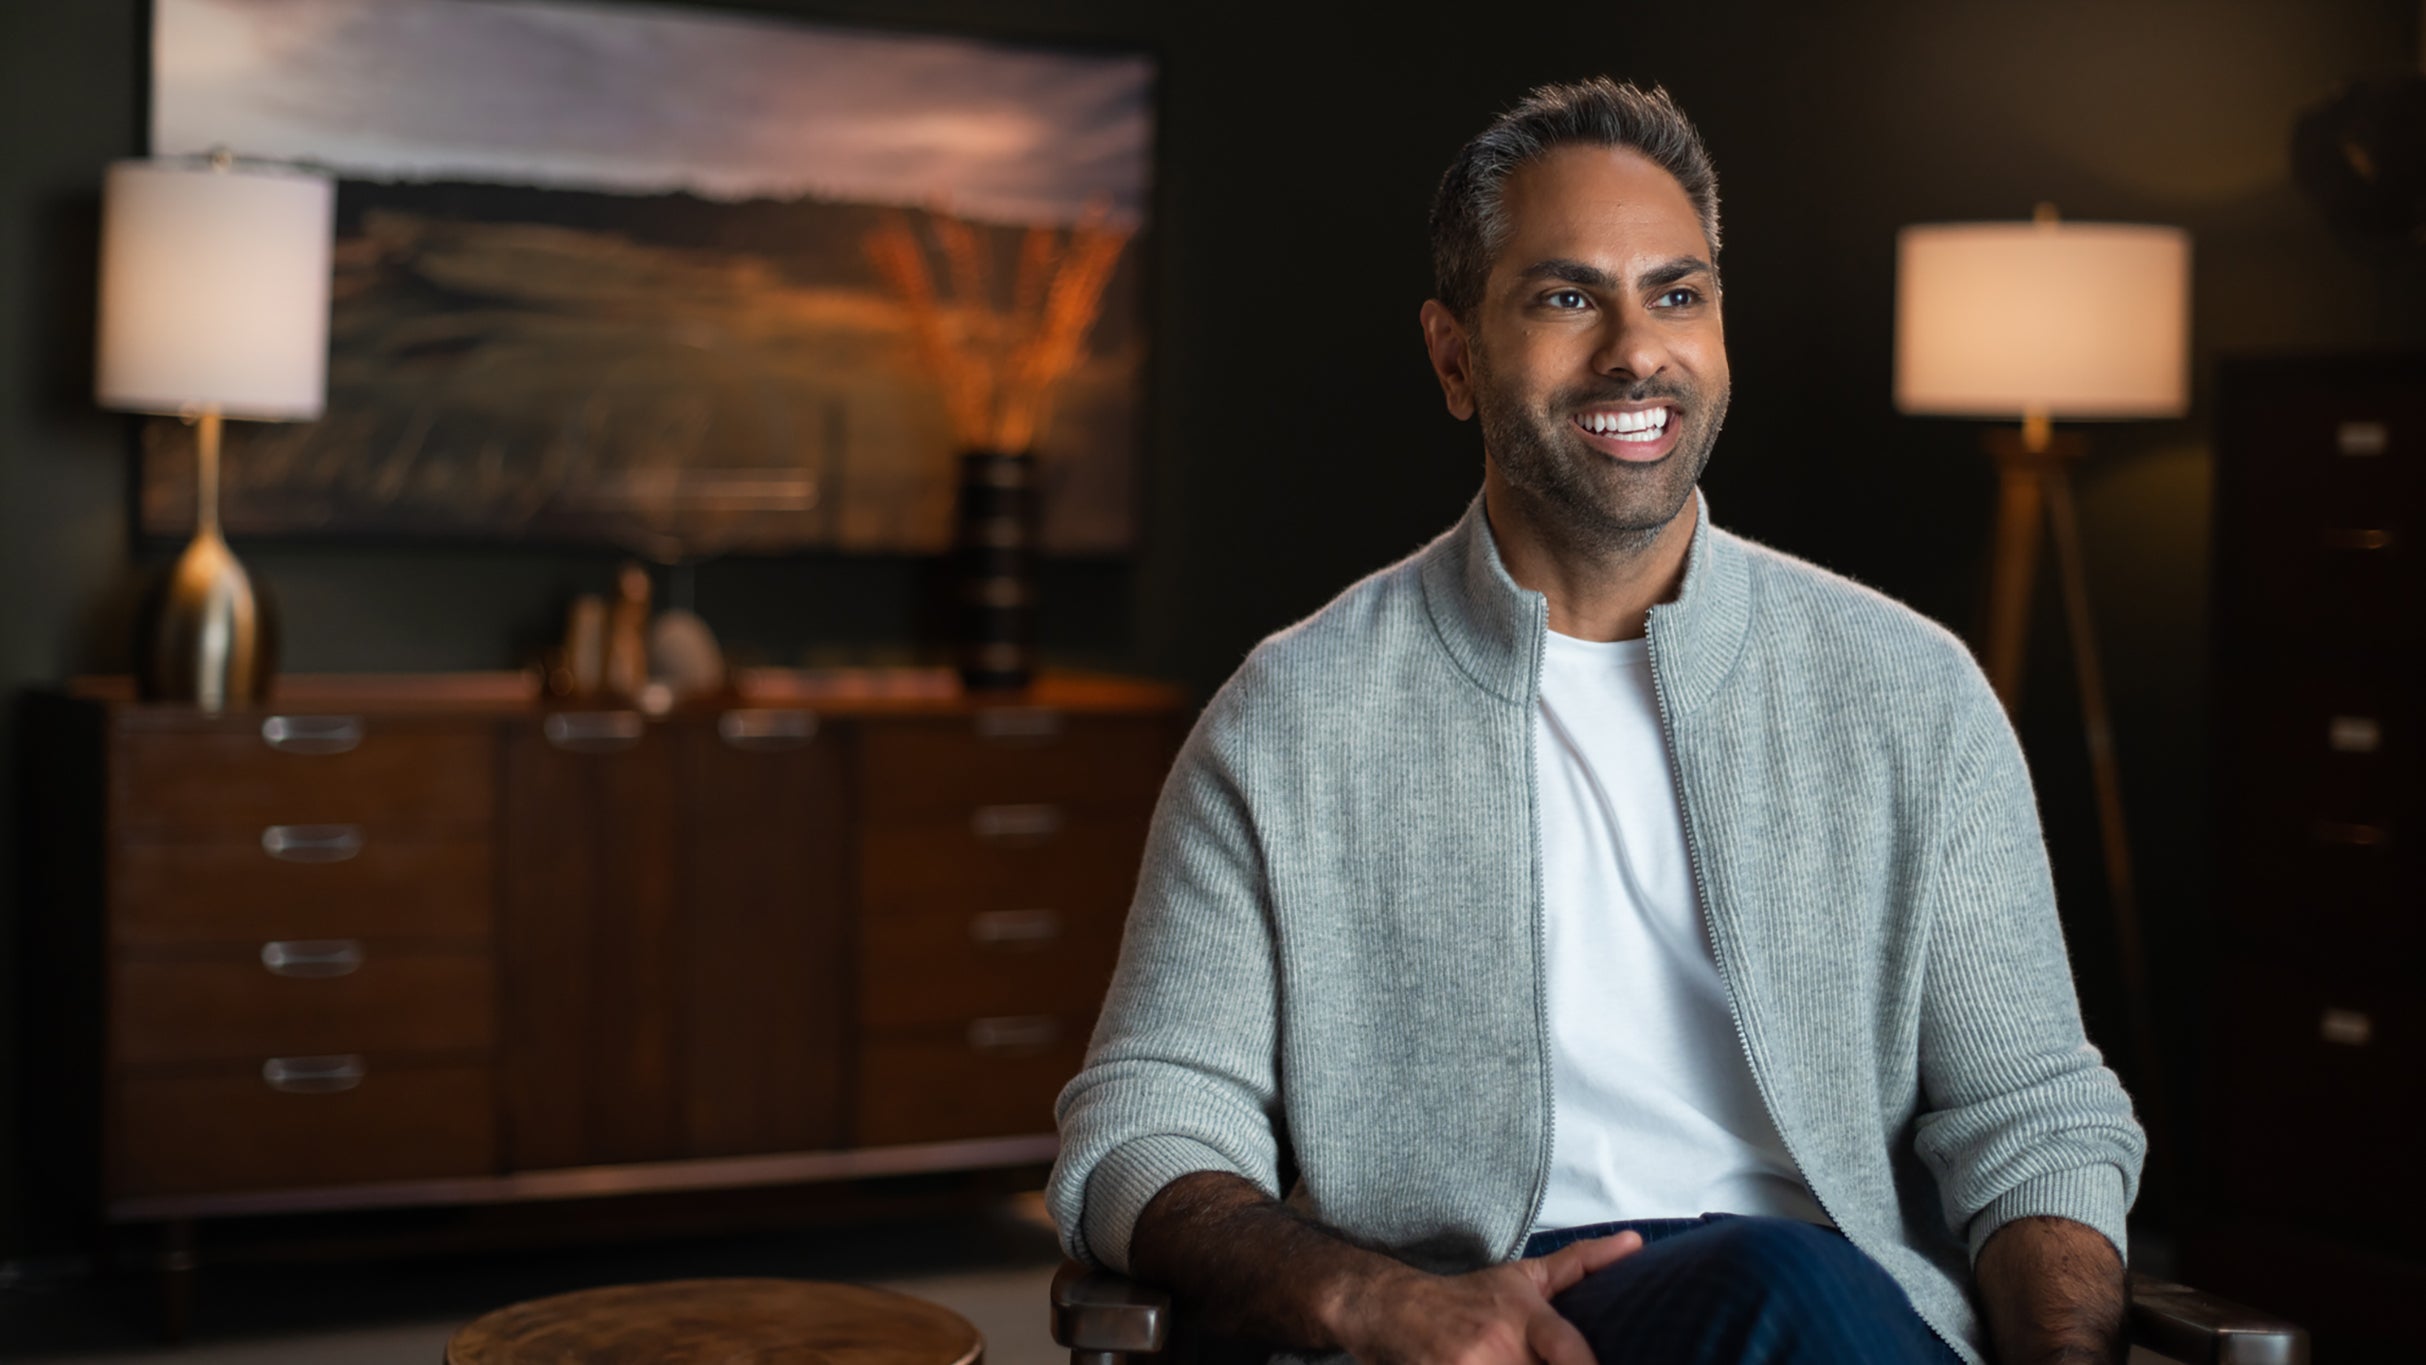 members only presale password for Love And Money: An Evening With Ramit Sethi advanced tickets in New York